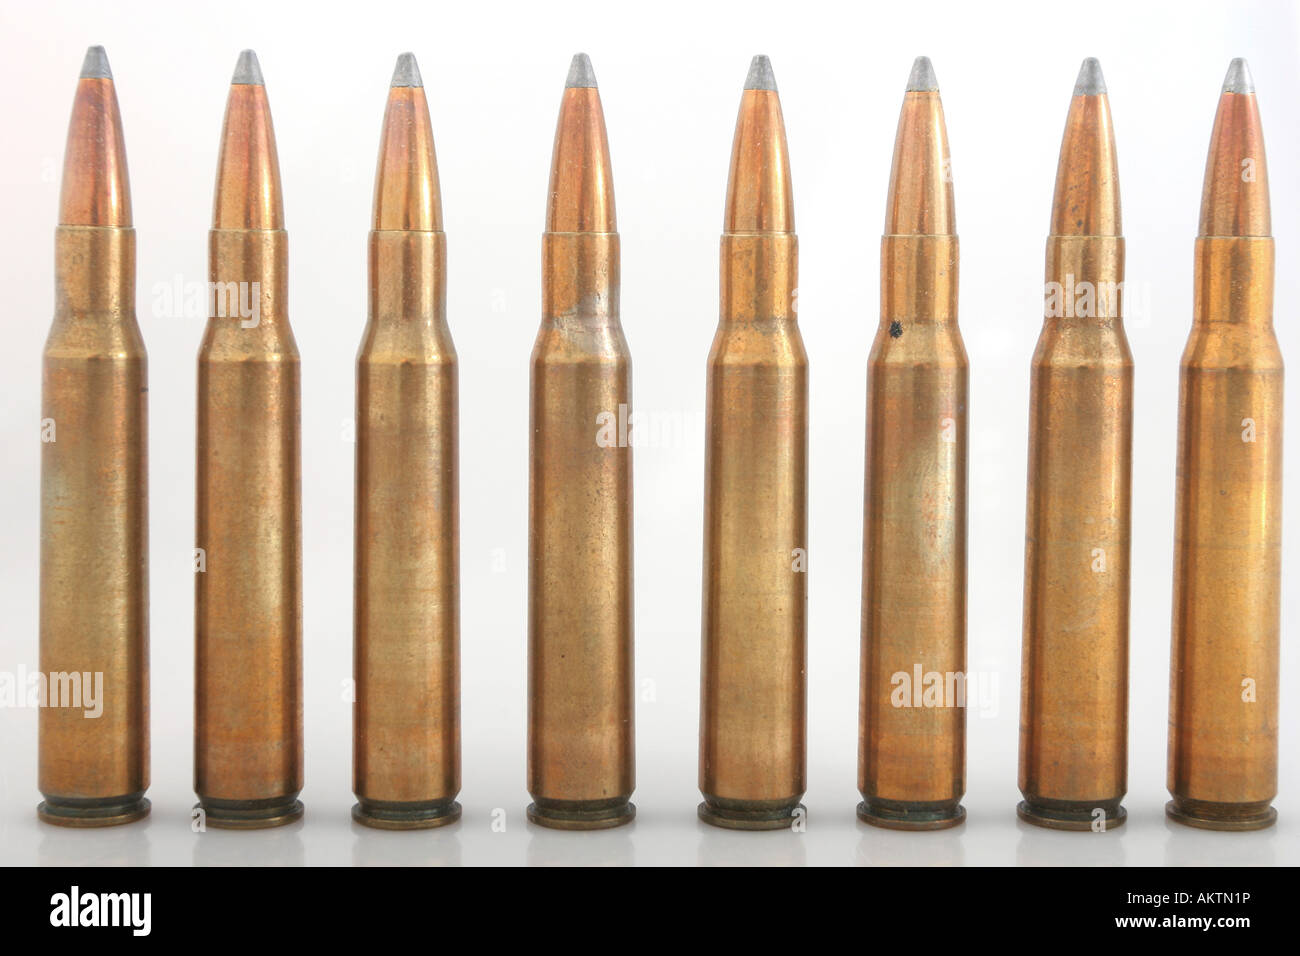 Which caliber bullet is bigger, the .30-06 or 7 mm? - Quora